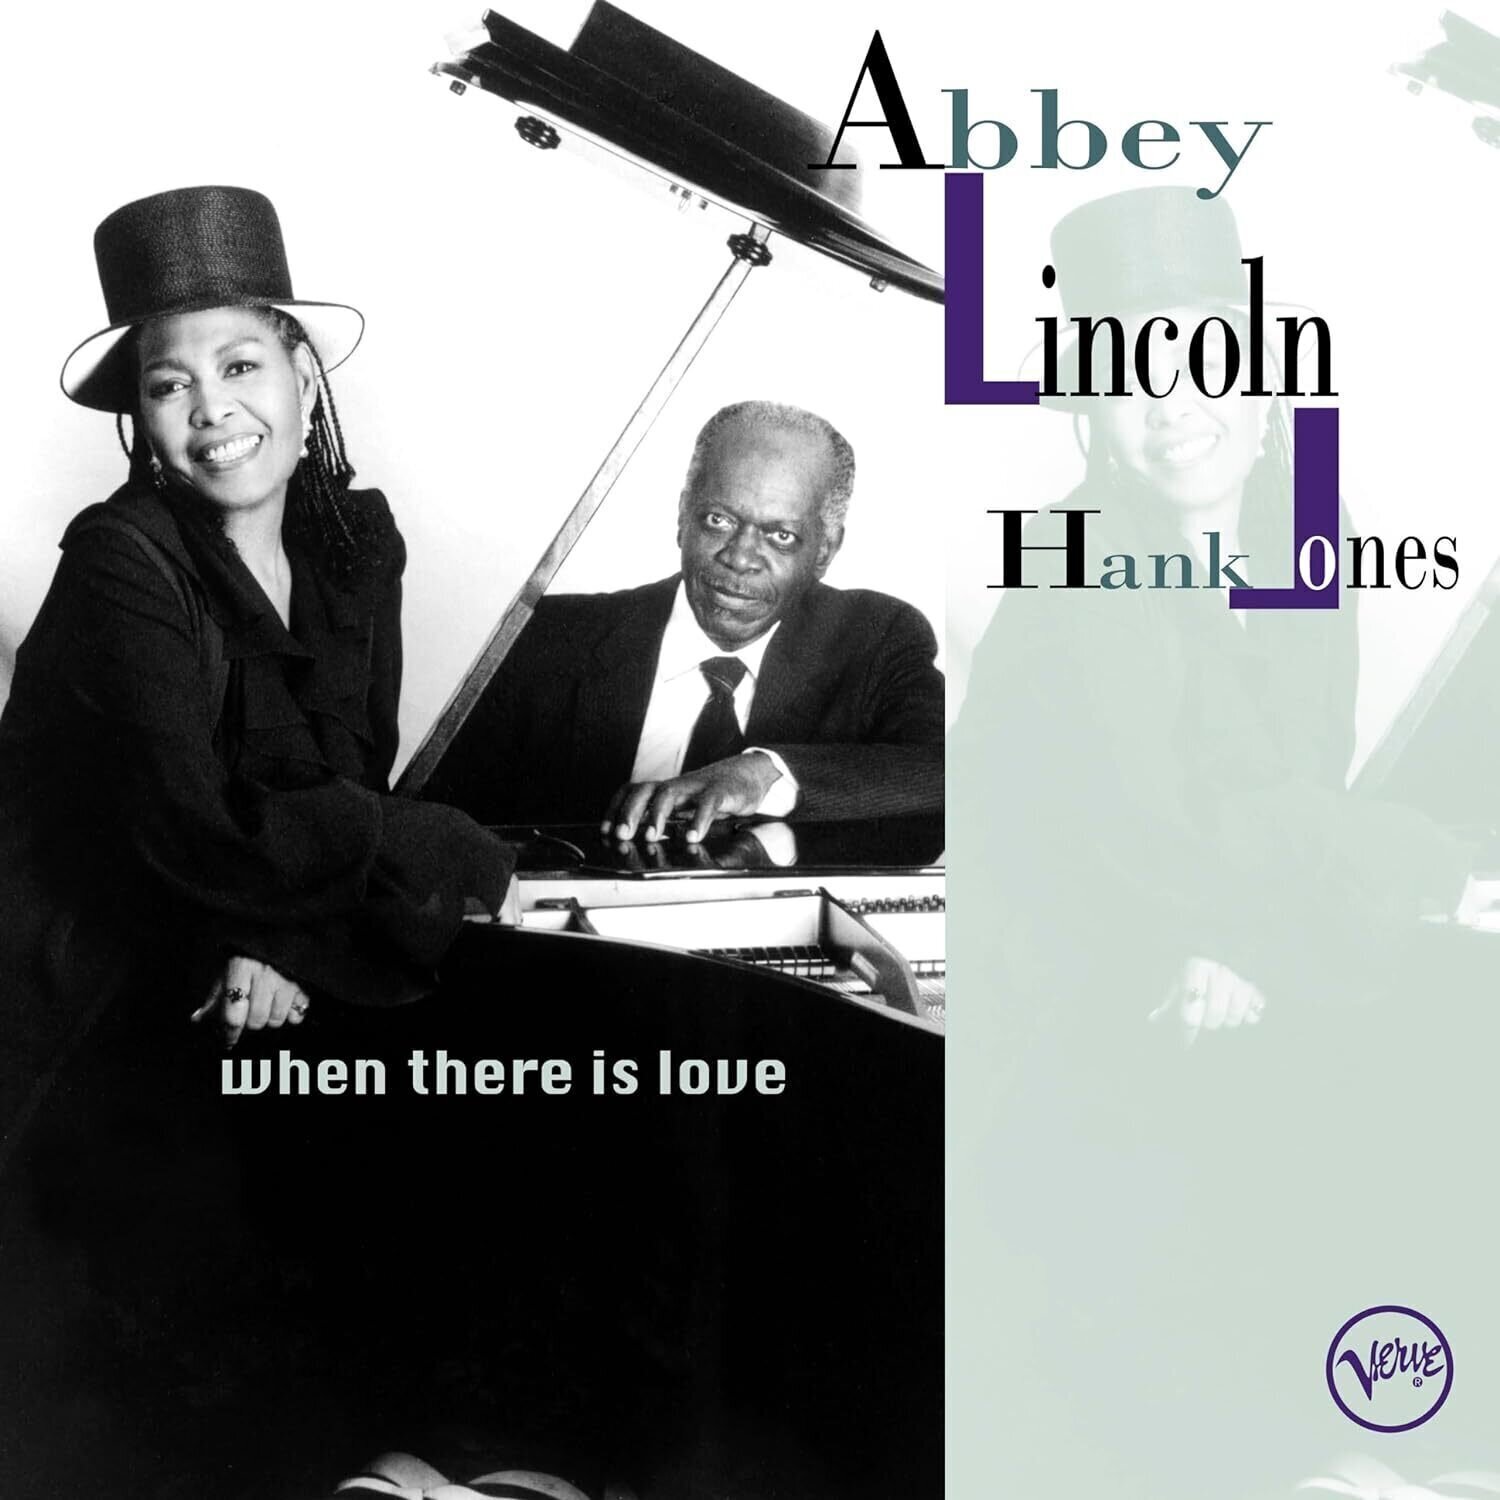 Vinyl Record Abbey Lincoln & Hank Jones - When There Is Love (2 LP)